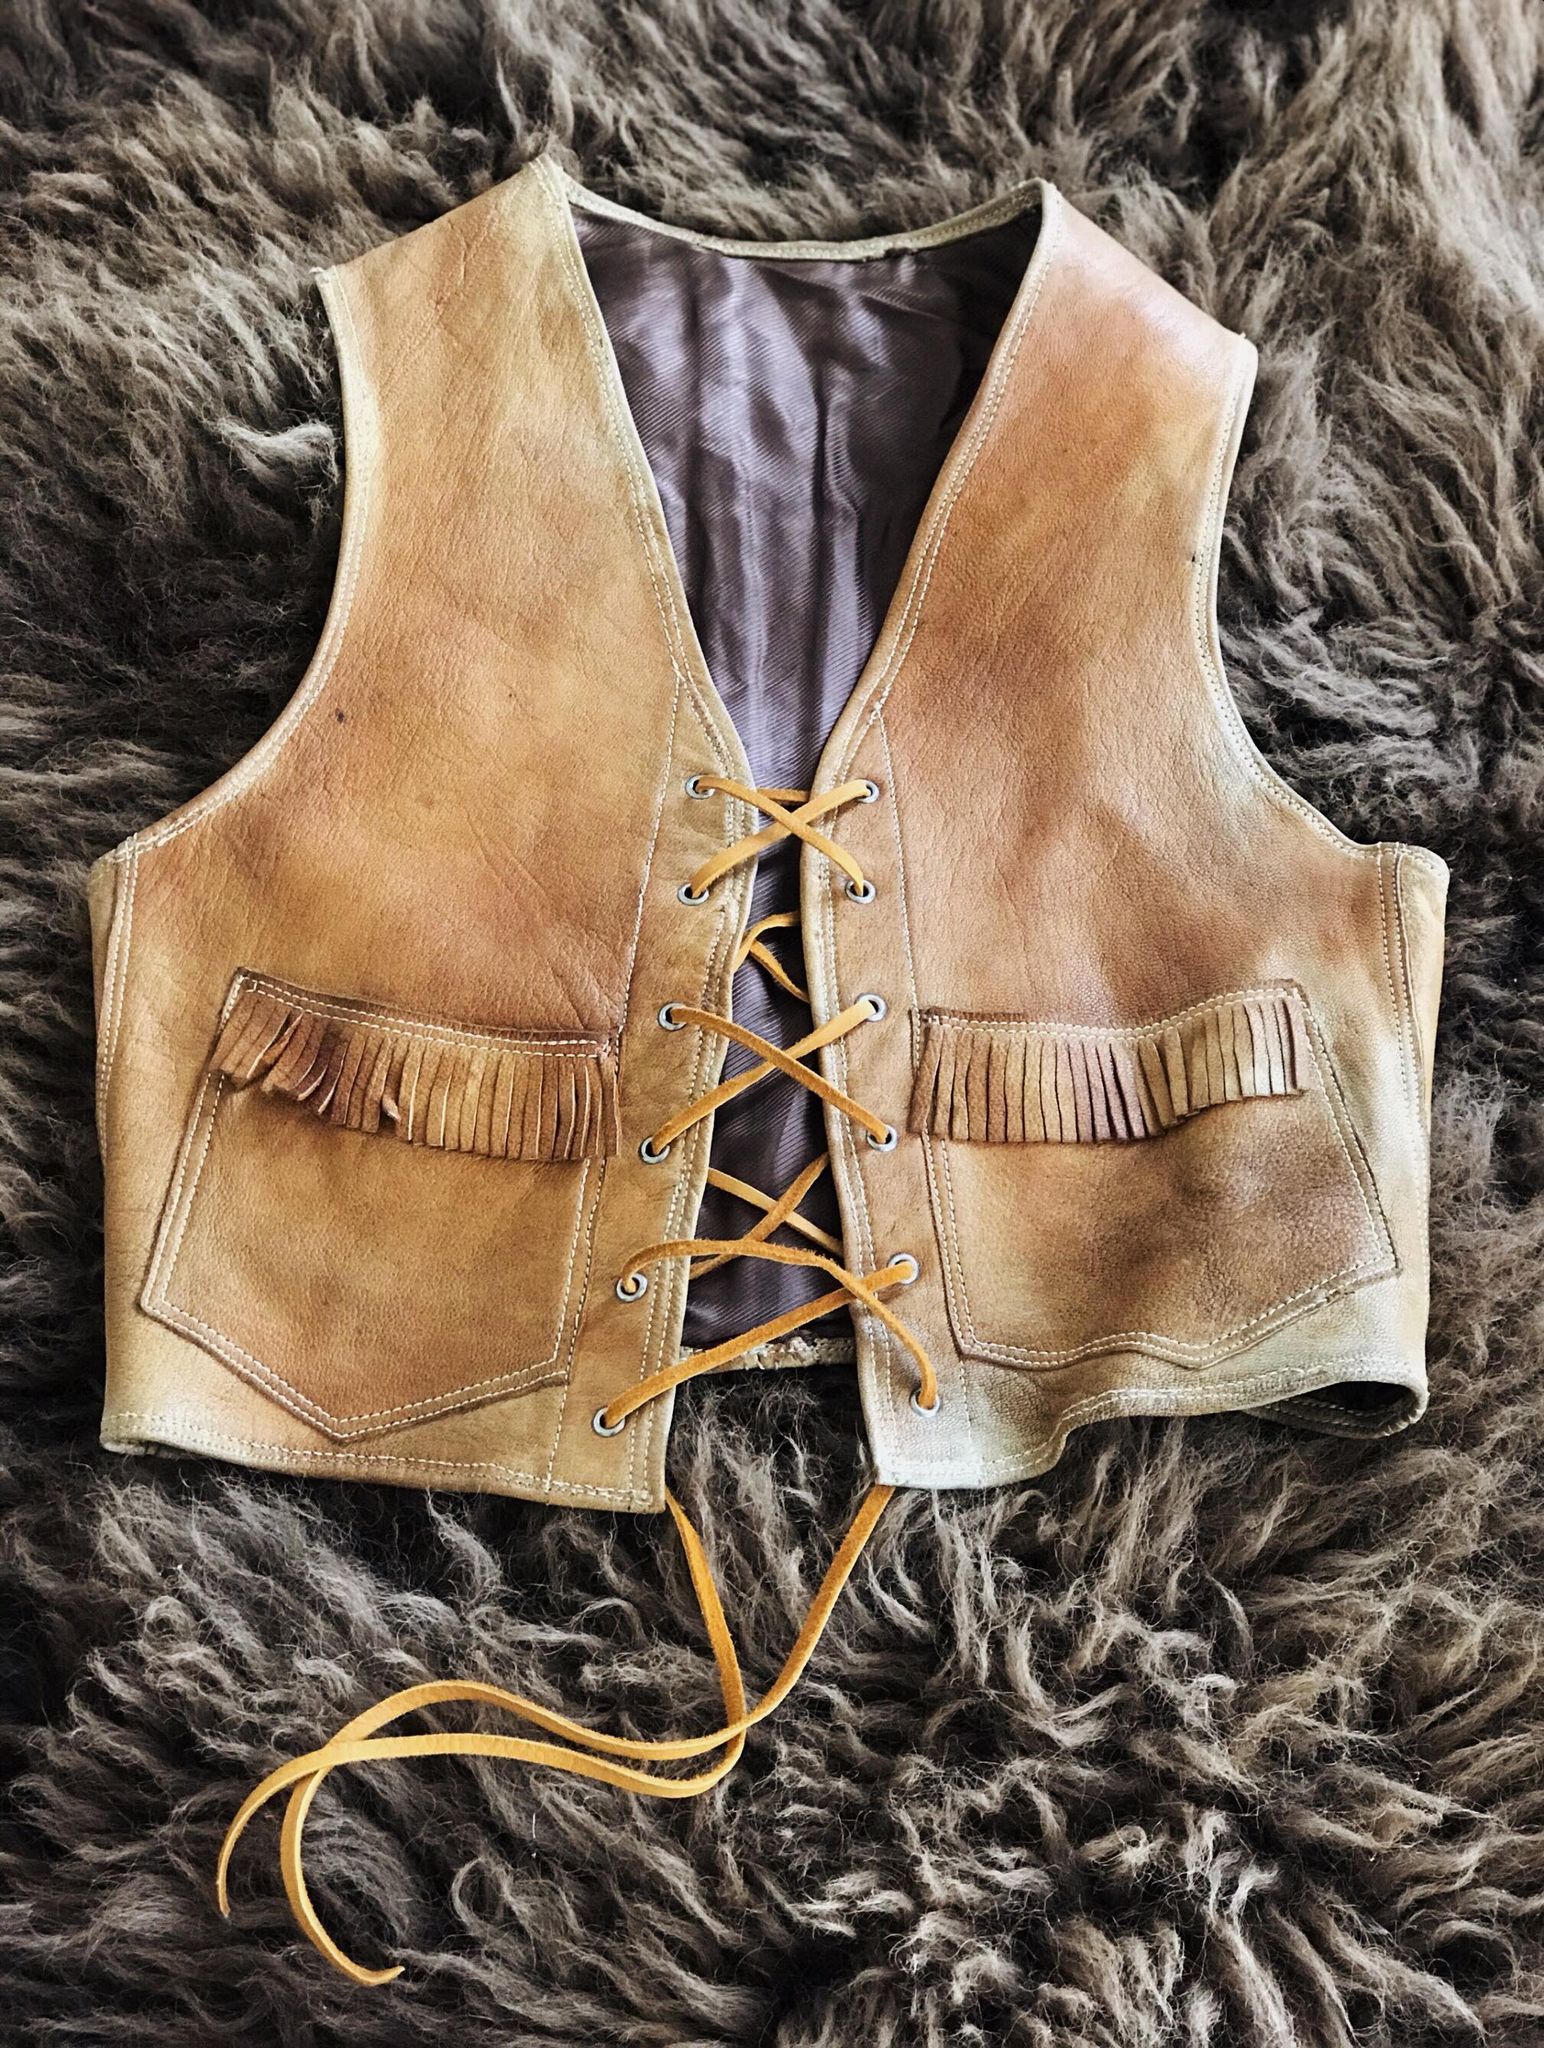 Vintage Cowgirl's Vest from the 1950's